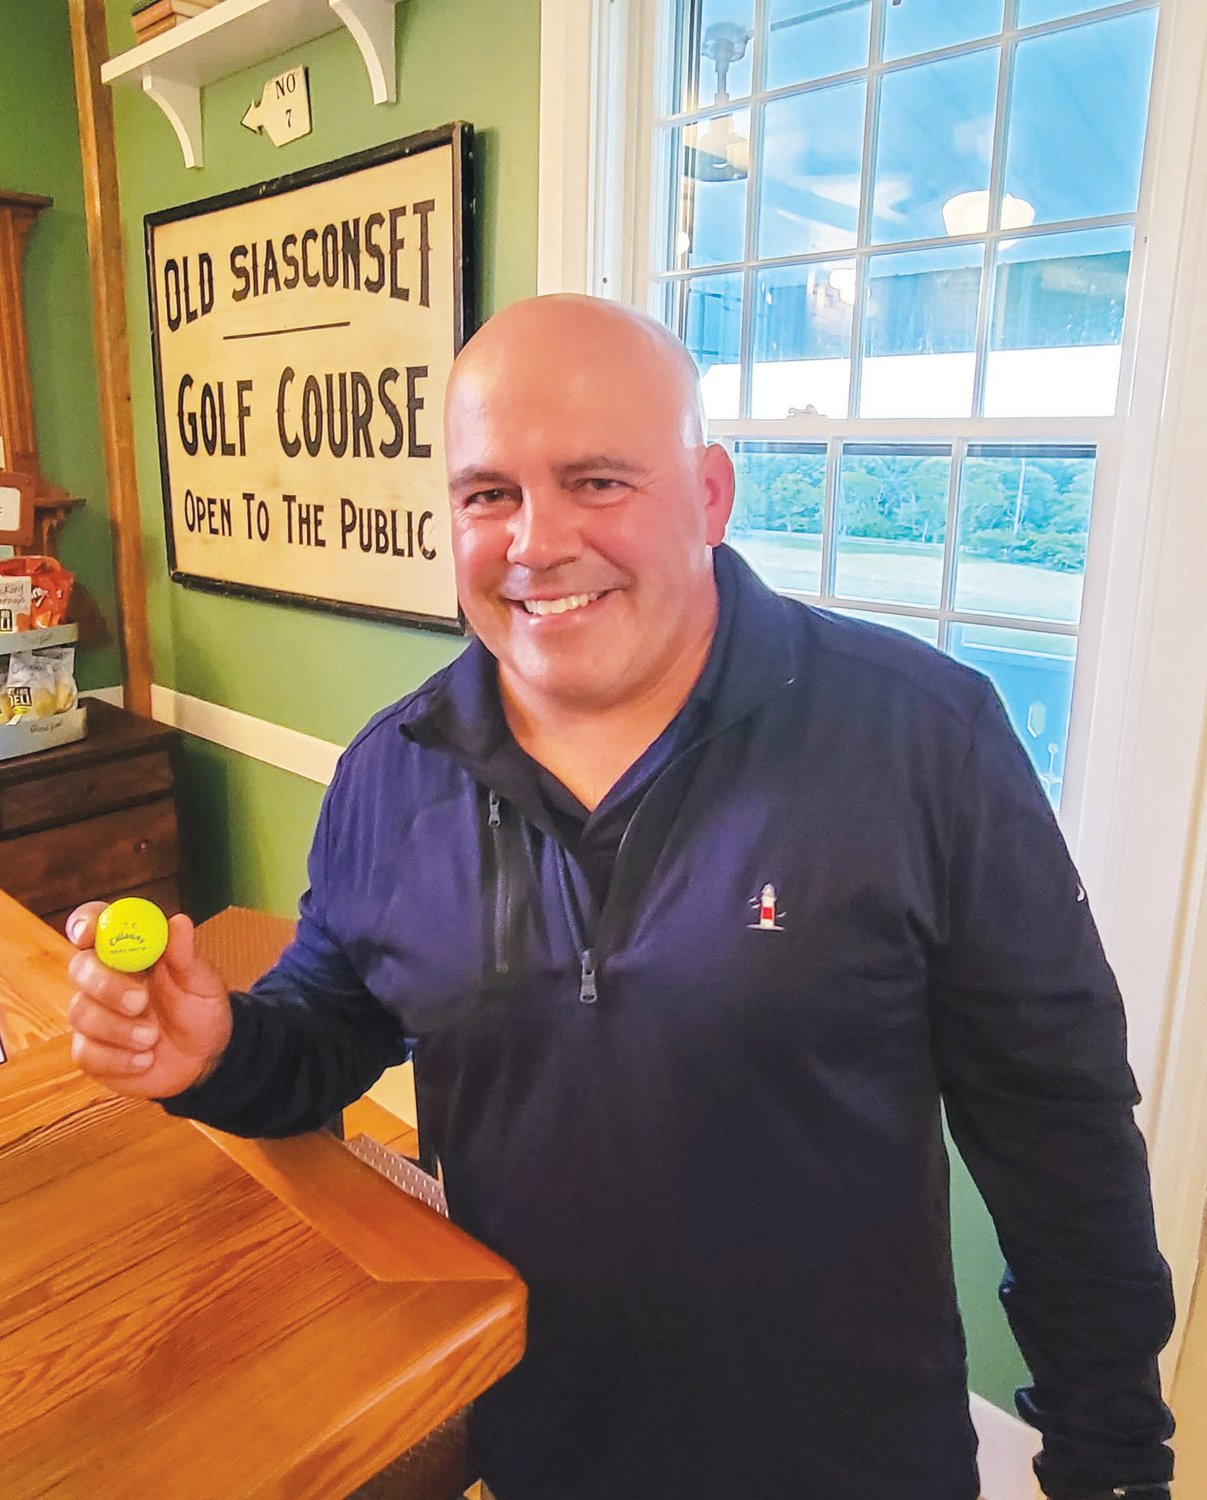 Chris Bistany had a hole-in-one on the seventh hole last week, the first in men’s league history and the first this season on the nine-hole course. He picked up the tab in the clubhouse bar.